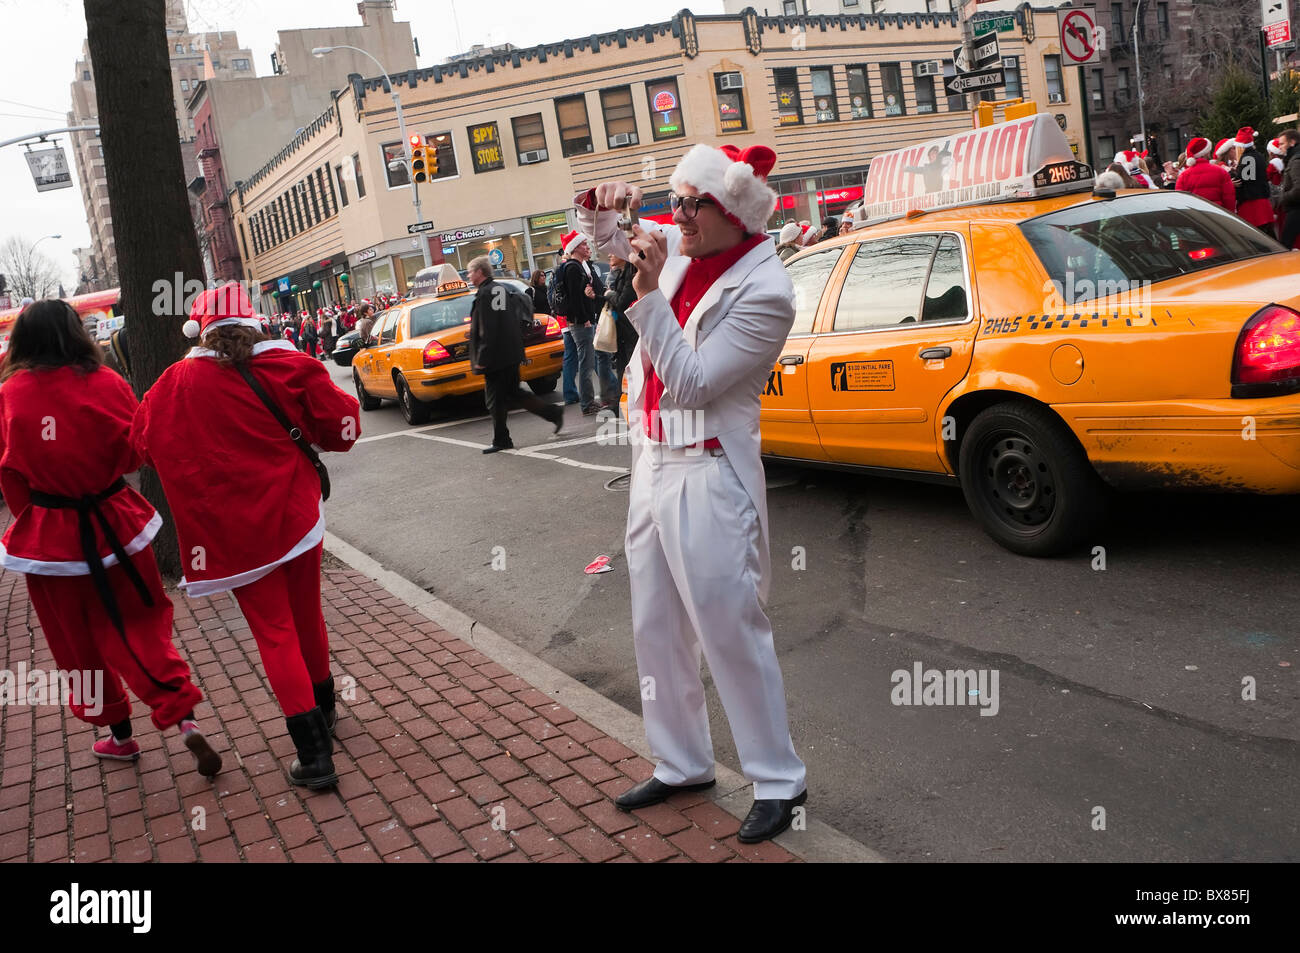 New York, NY - 11 décembre 2010 Santacon ©Stacy Walsh Rosenstock/Alamy Banque D'Images